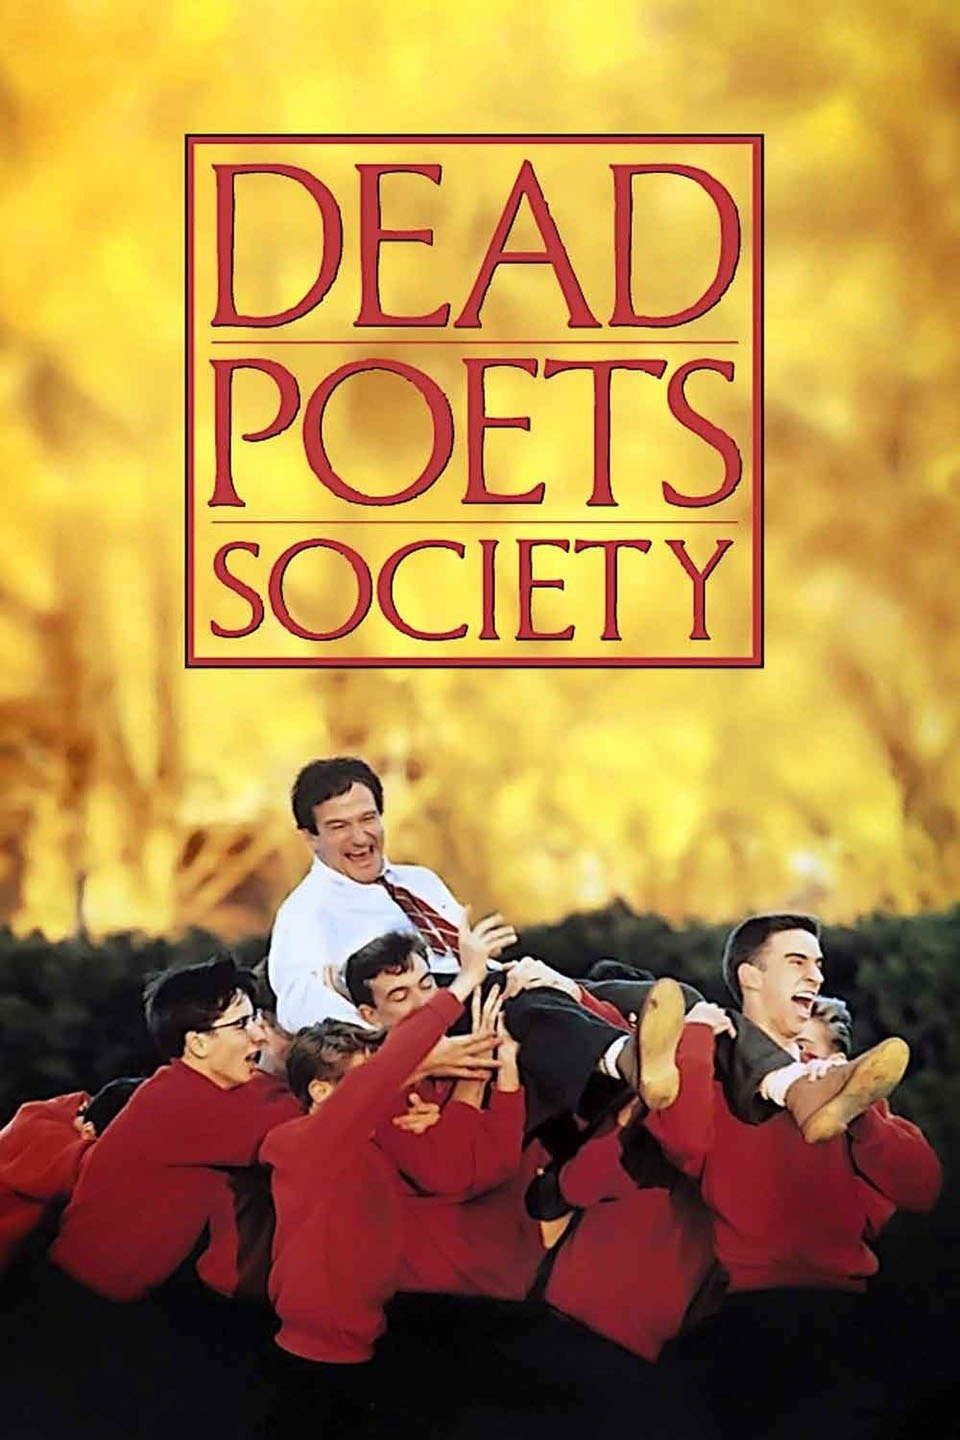 dead poets society character analysis essay